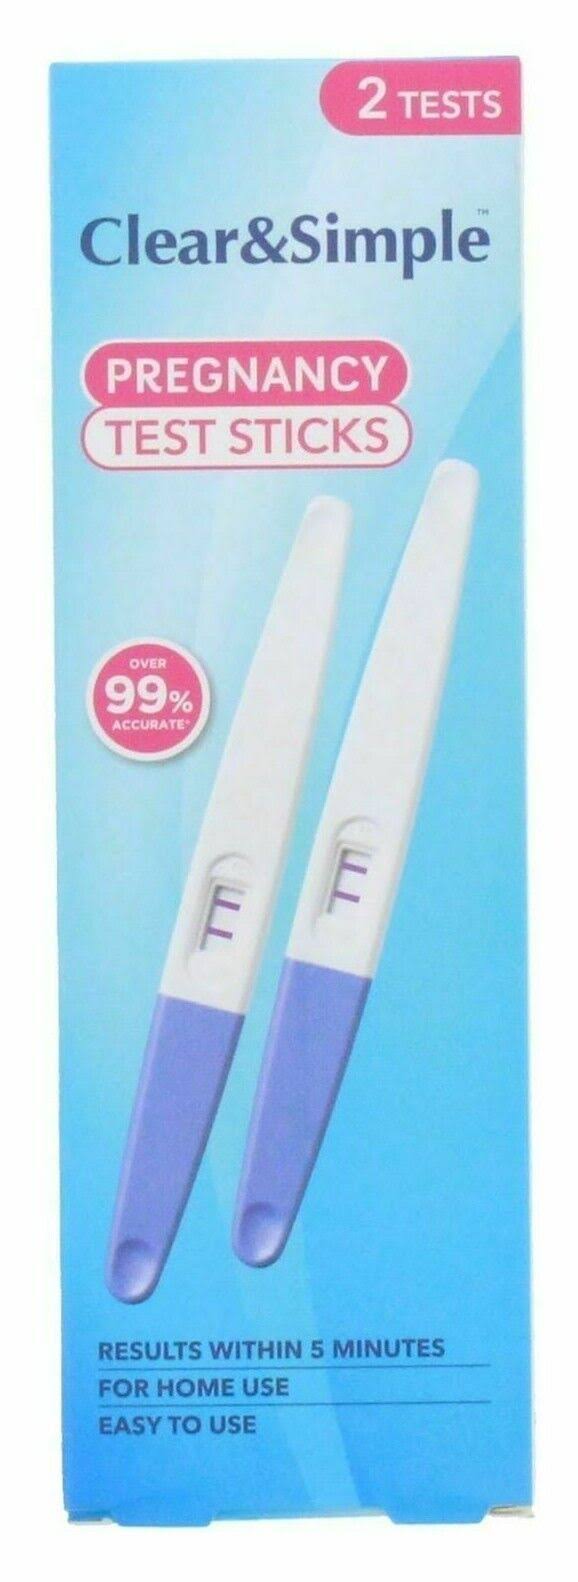 Clear & Simple Pregnancy Test 2 Tests